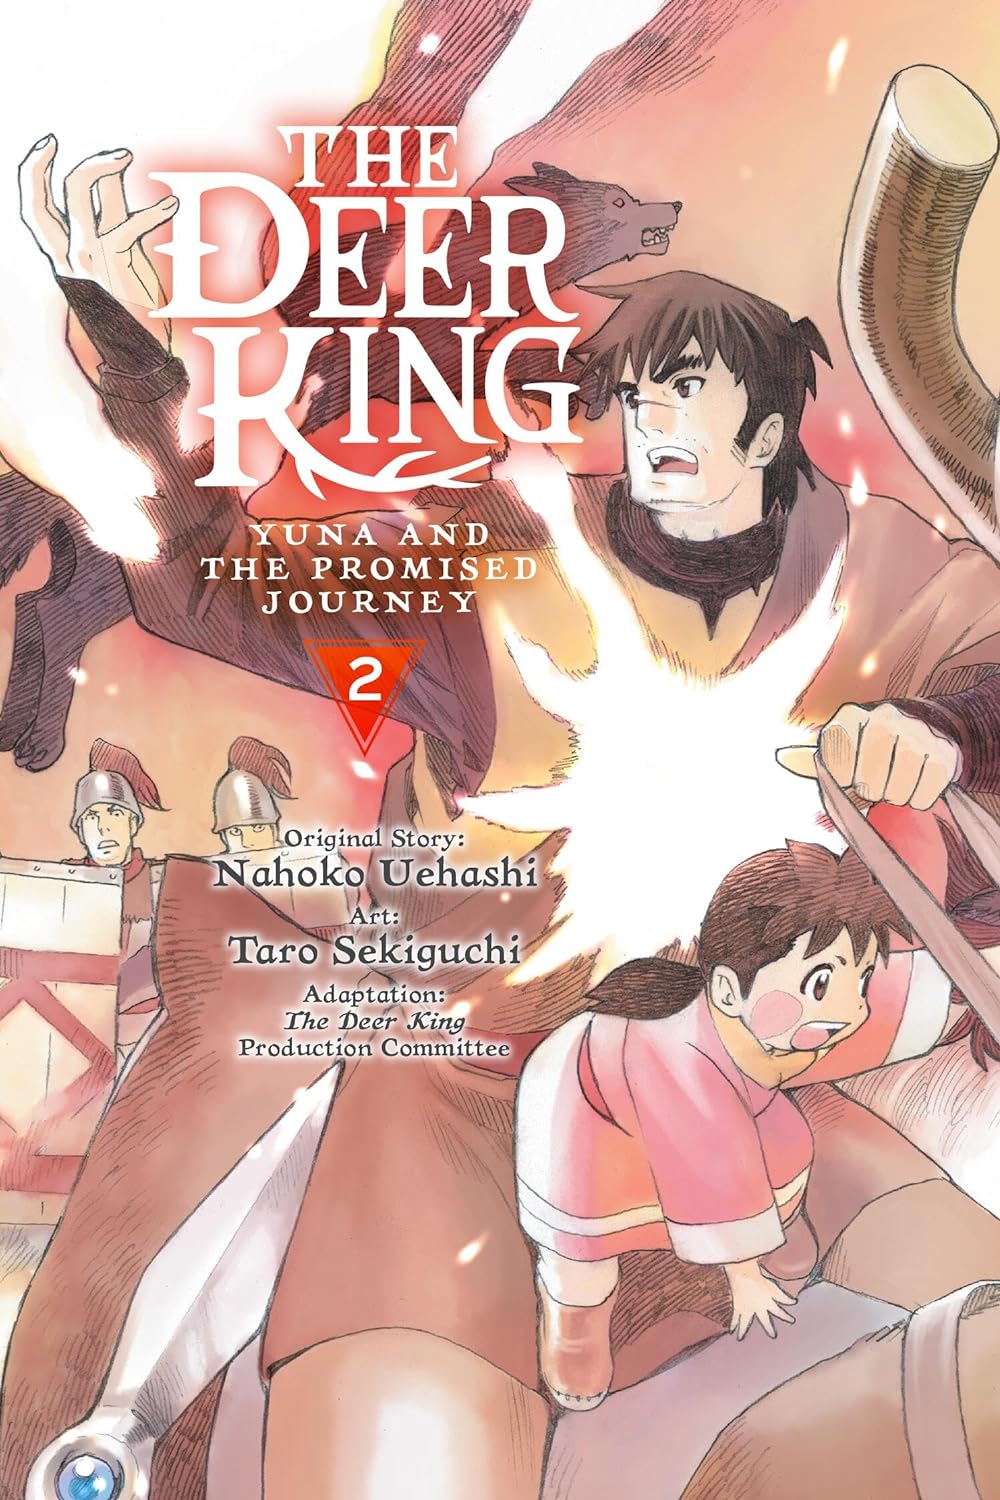 The Deer King Vol. 02 (Manga): Yuna and the Promised Journey